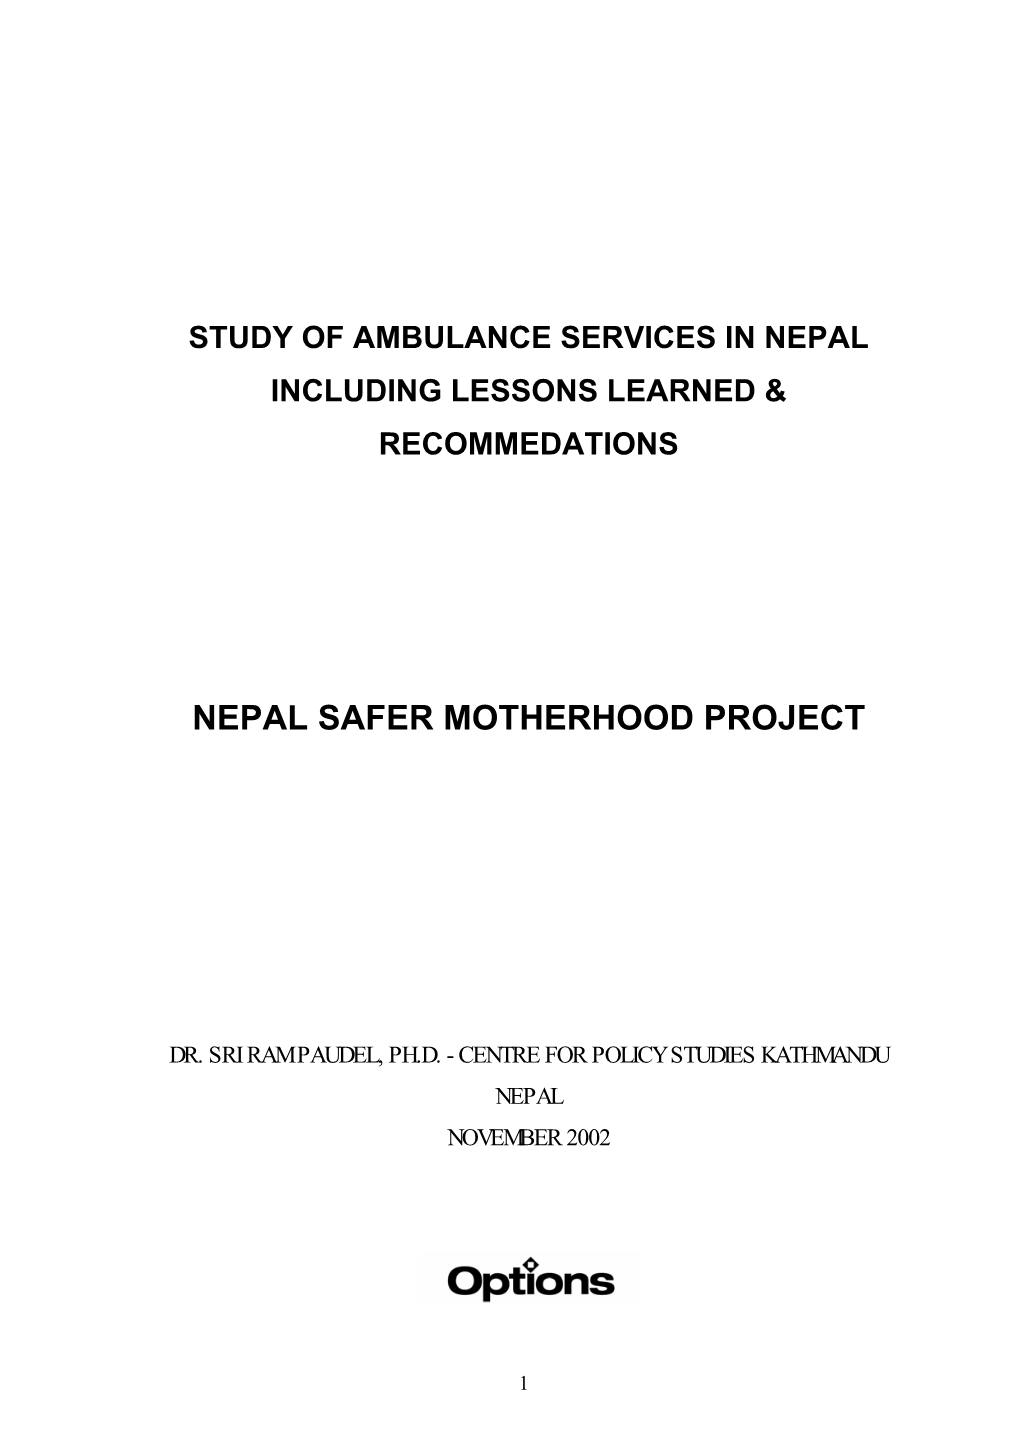 Study of Ambulance Services in Nepal Including Lessons Learned & Recommedations